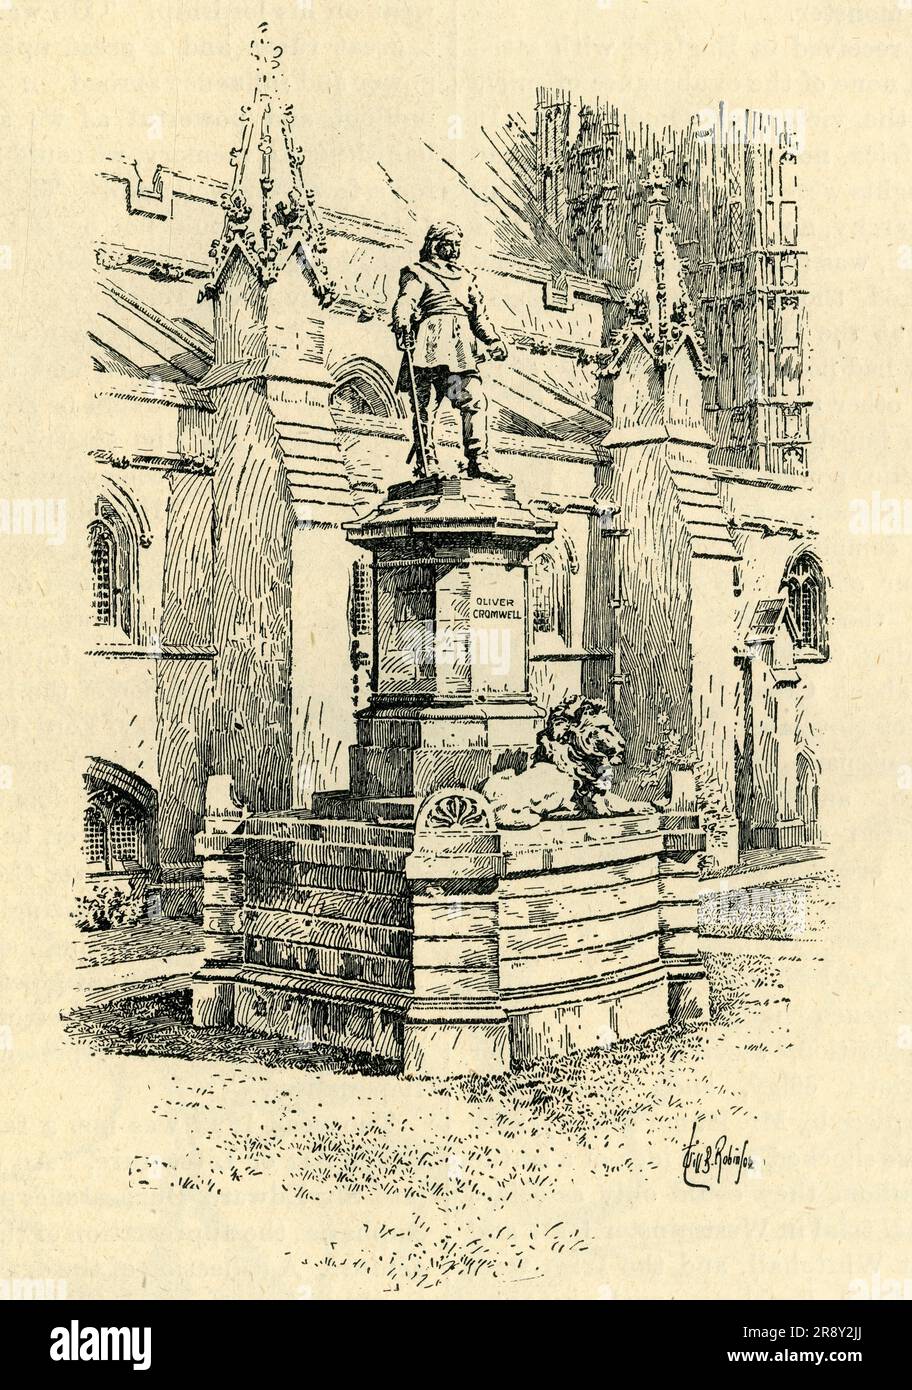 'The New Statue of Cromwell in Front of Westminster Hall', c1900. Statue of Oliver Cromwell, Lord Protector of the Commonwealth of England, Scotland and Ireland 1653-1658, designed by Hamo Thornycroft and erected in 1899. It was unveiled on the tercentenary of Cromwell's birth. 'Many people were shocked at the idea of a statue erected to one whom they could only associate with the historical trial at Westminster Hall and the execution at Whitehall, and the Irish were furious...Lord Rosebery...dismissed the execution of Charles the First as a political blunder...&quot;Happy is the dynasty that Stock Photo